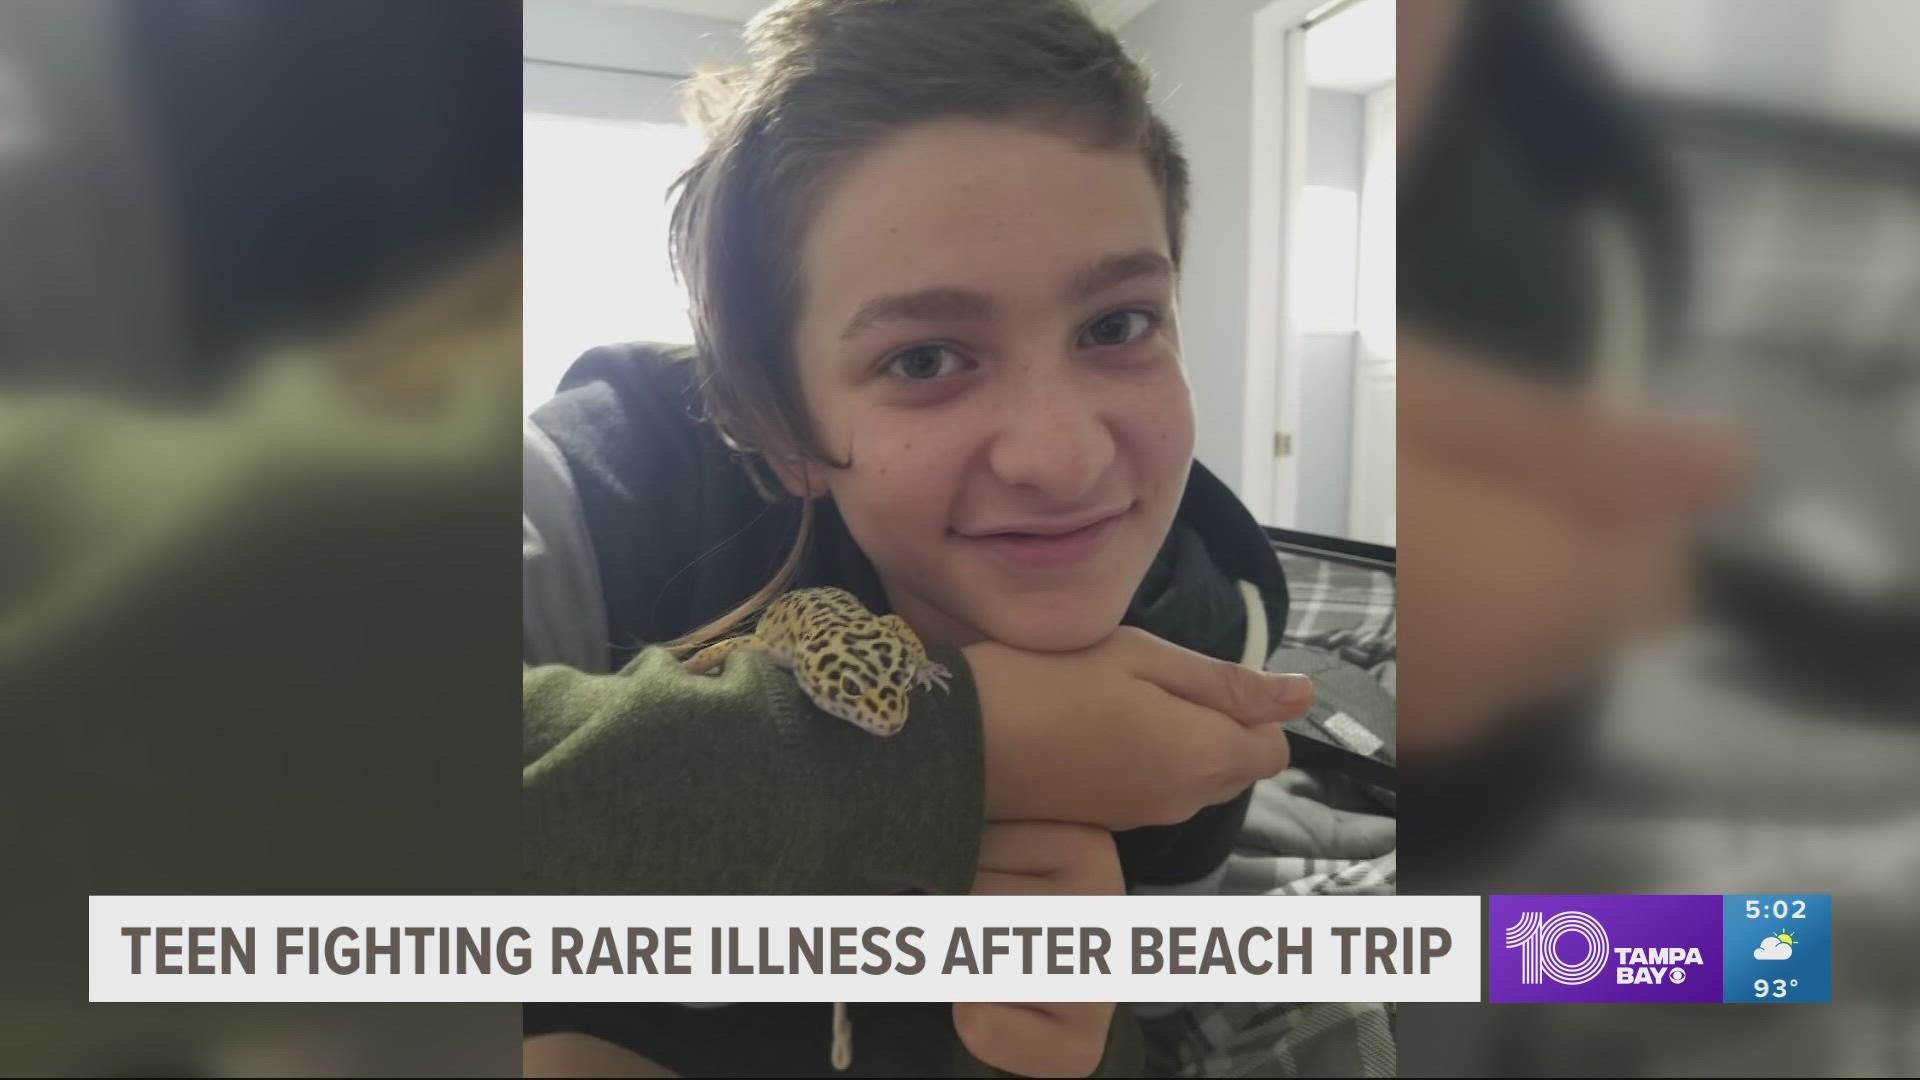 Caleb Ziegelbauer got sick after a trip to a Port Charlotte beach in July. Since then, he's been treated for a presumed amoeba infection in his brain.